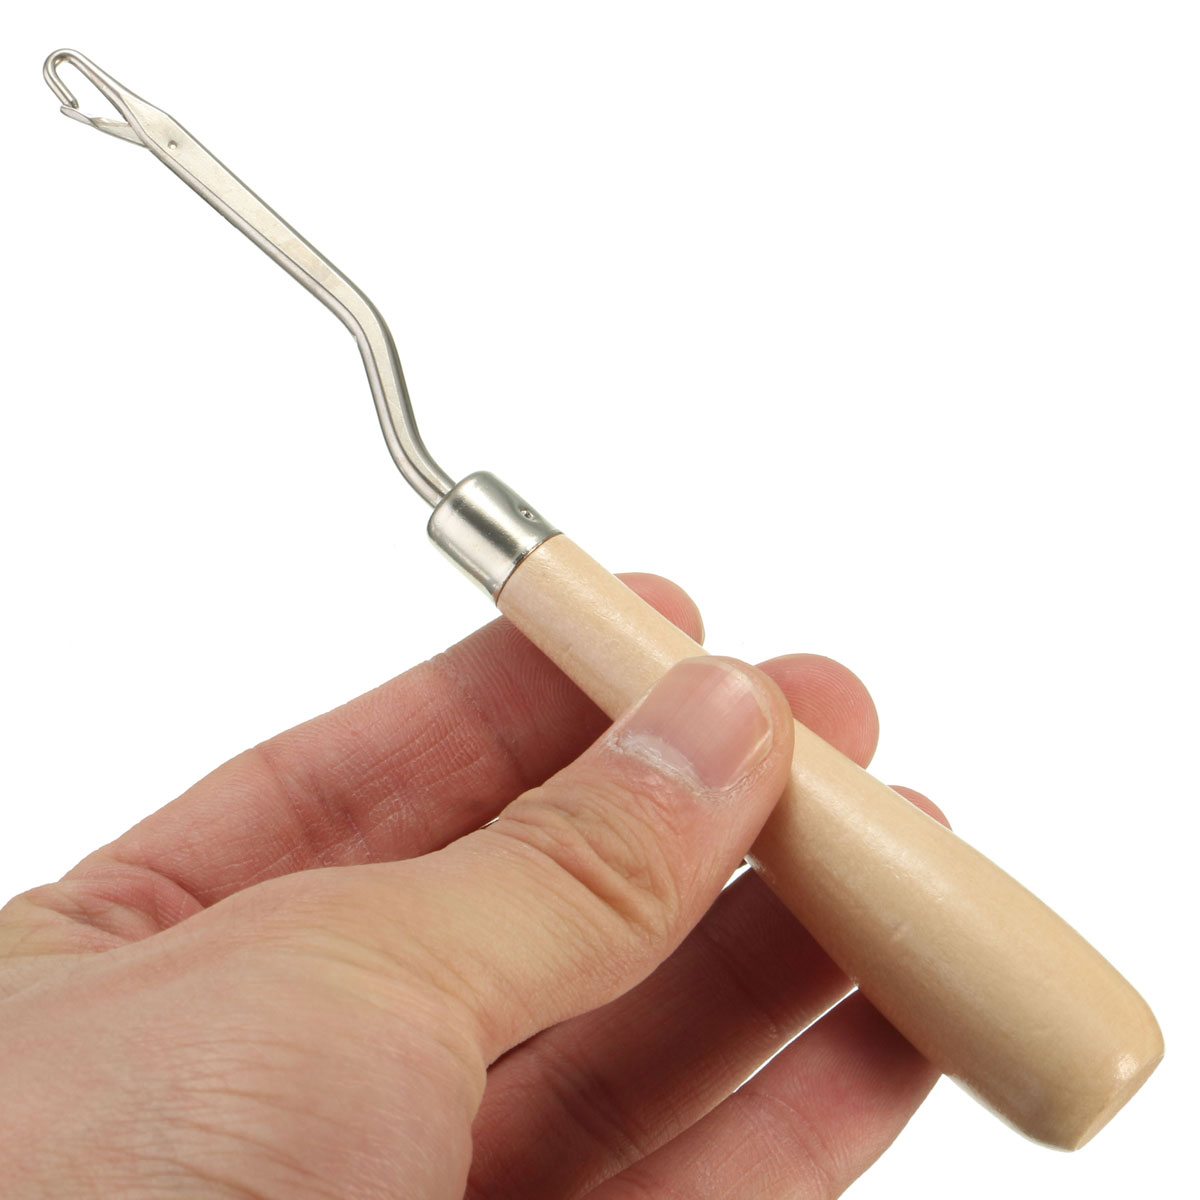 Wooden Handle Crochet Needle Latch Hook Puller Tool For Canvas Rug Mats Making 